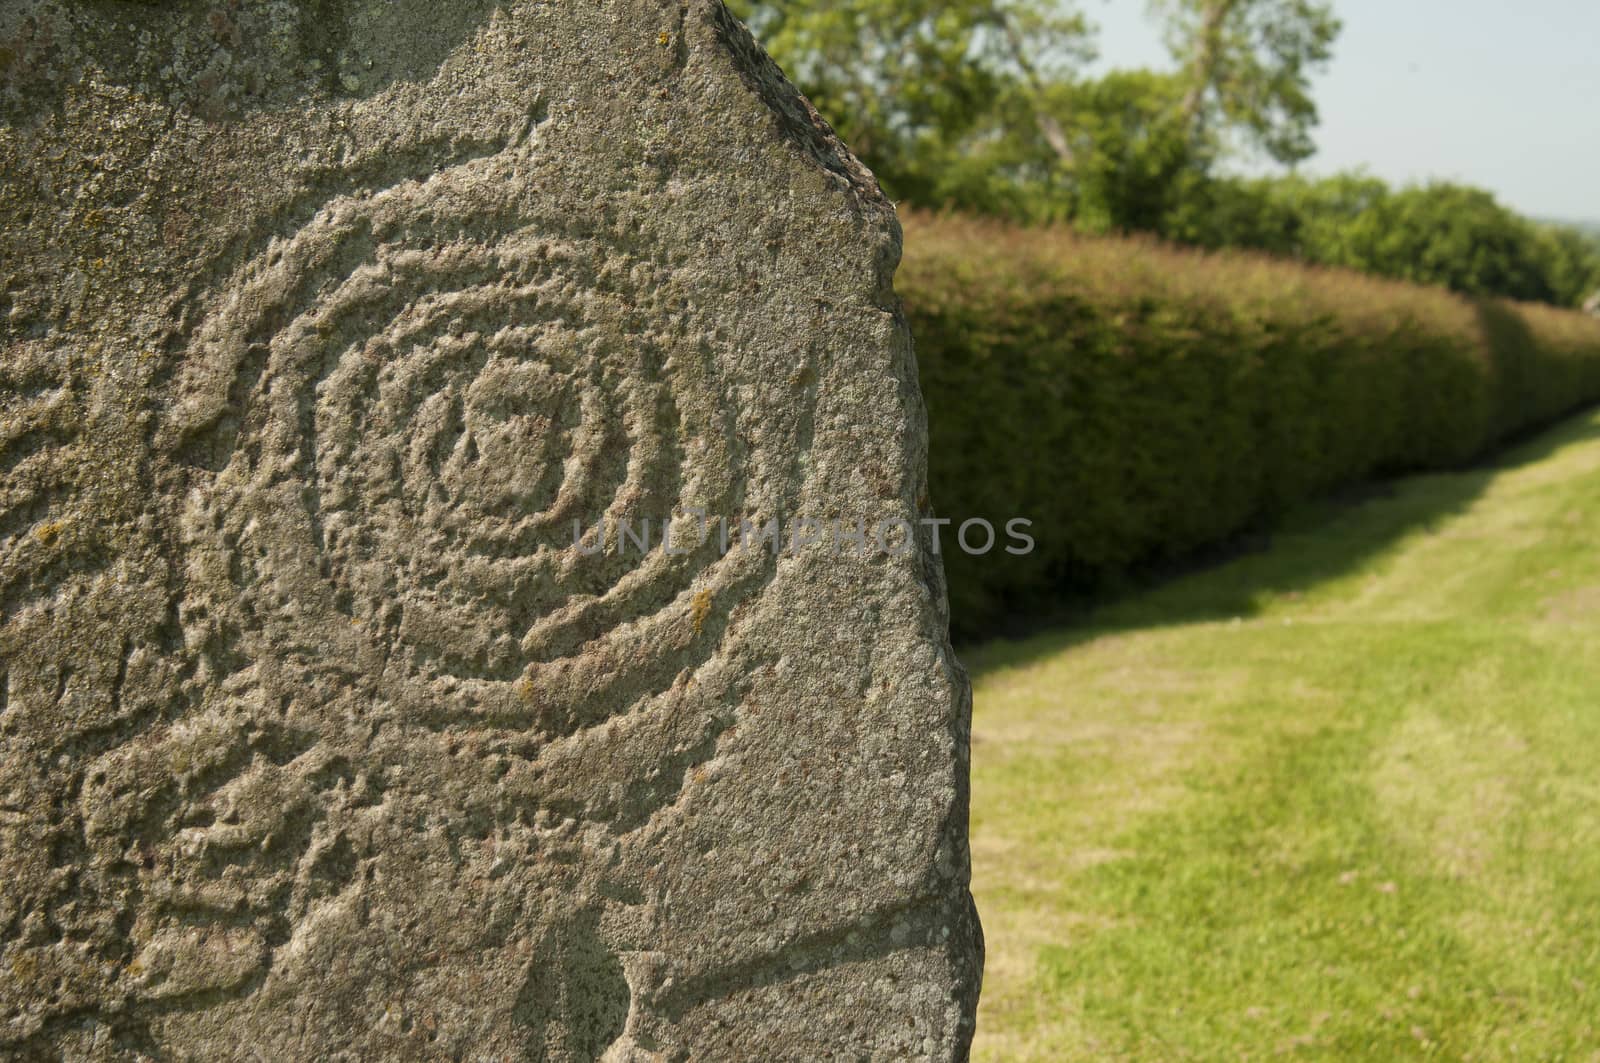 It is a Celtic and pre-Celtic symbol found on a number of Irish Megalithic and Neolithic sites, most notably inside the Newgrange passage tomb, on the entrance stone, and on some of the curbstones surrounding the mound.